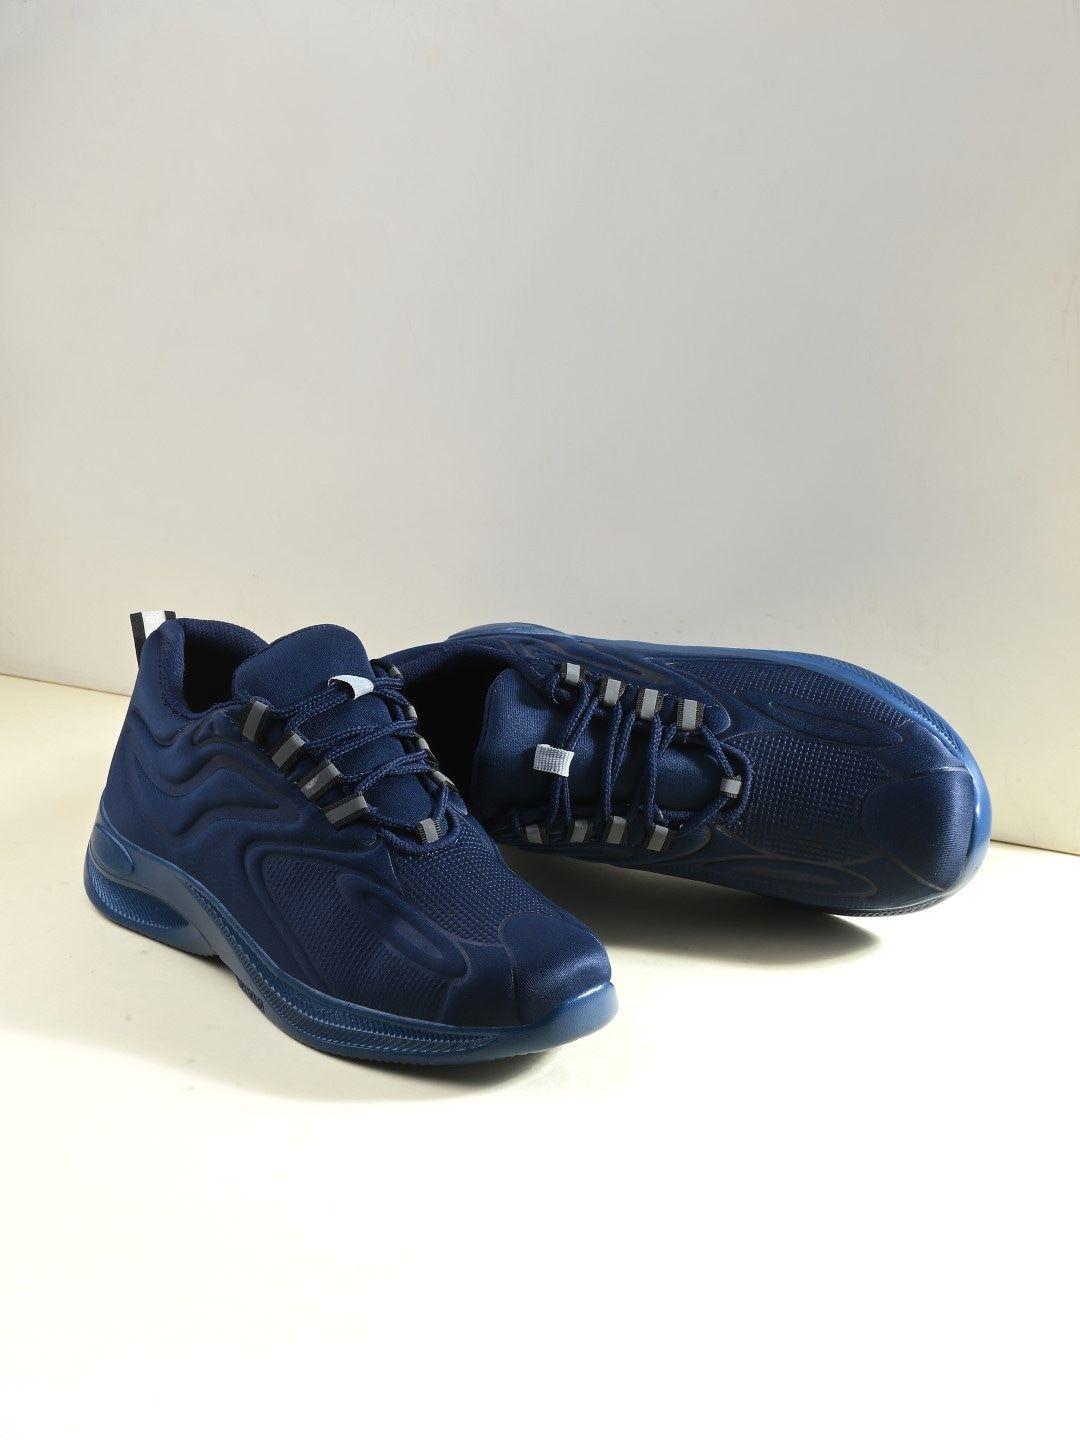 the roadster lifestyle co. men navy blue textured lightweight sneakers